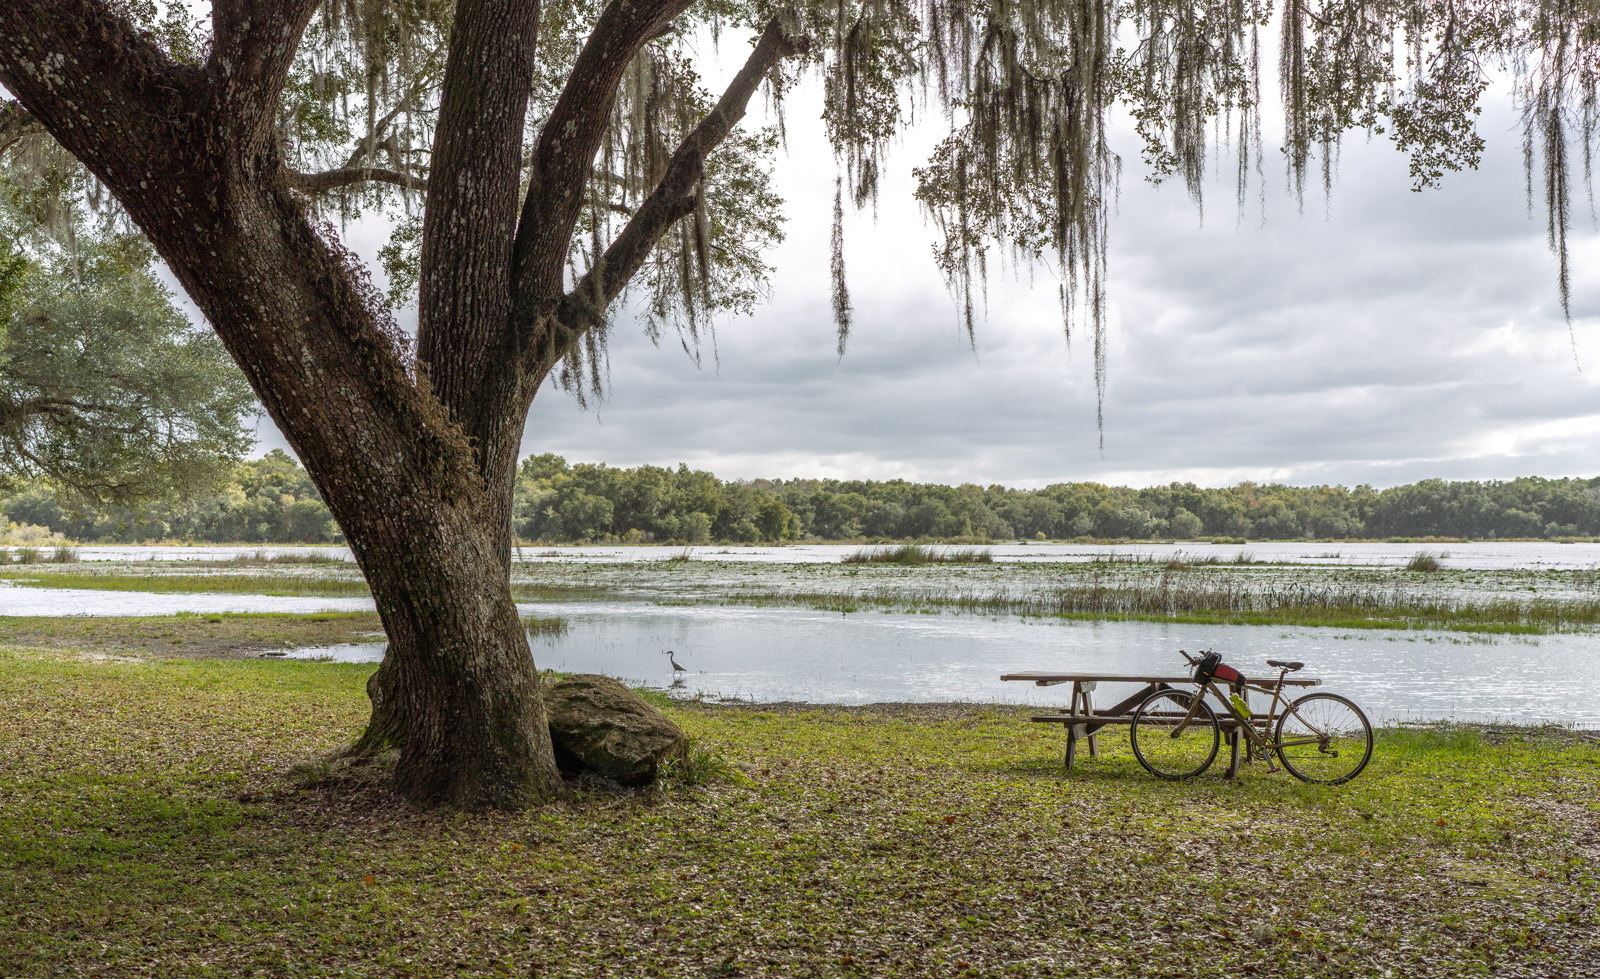 A bicycle is propped up against a wooden picnic table that is setting under a big live oak tree with Spanish Moss. There is water in the background and a small bird is wading in it.